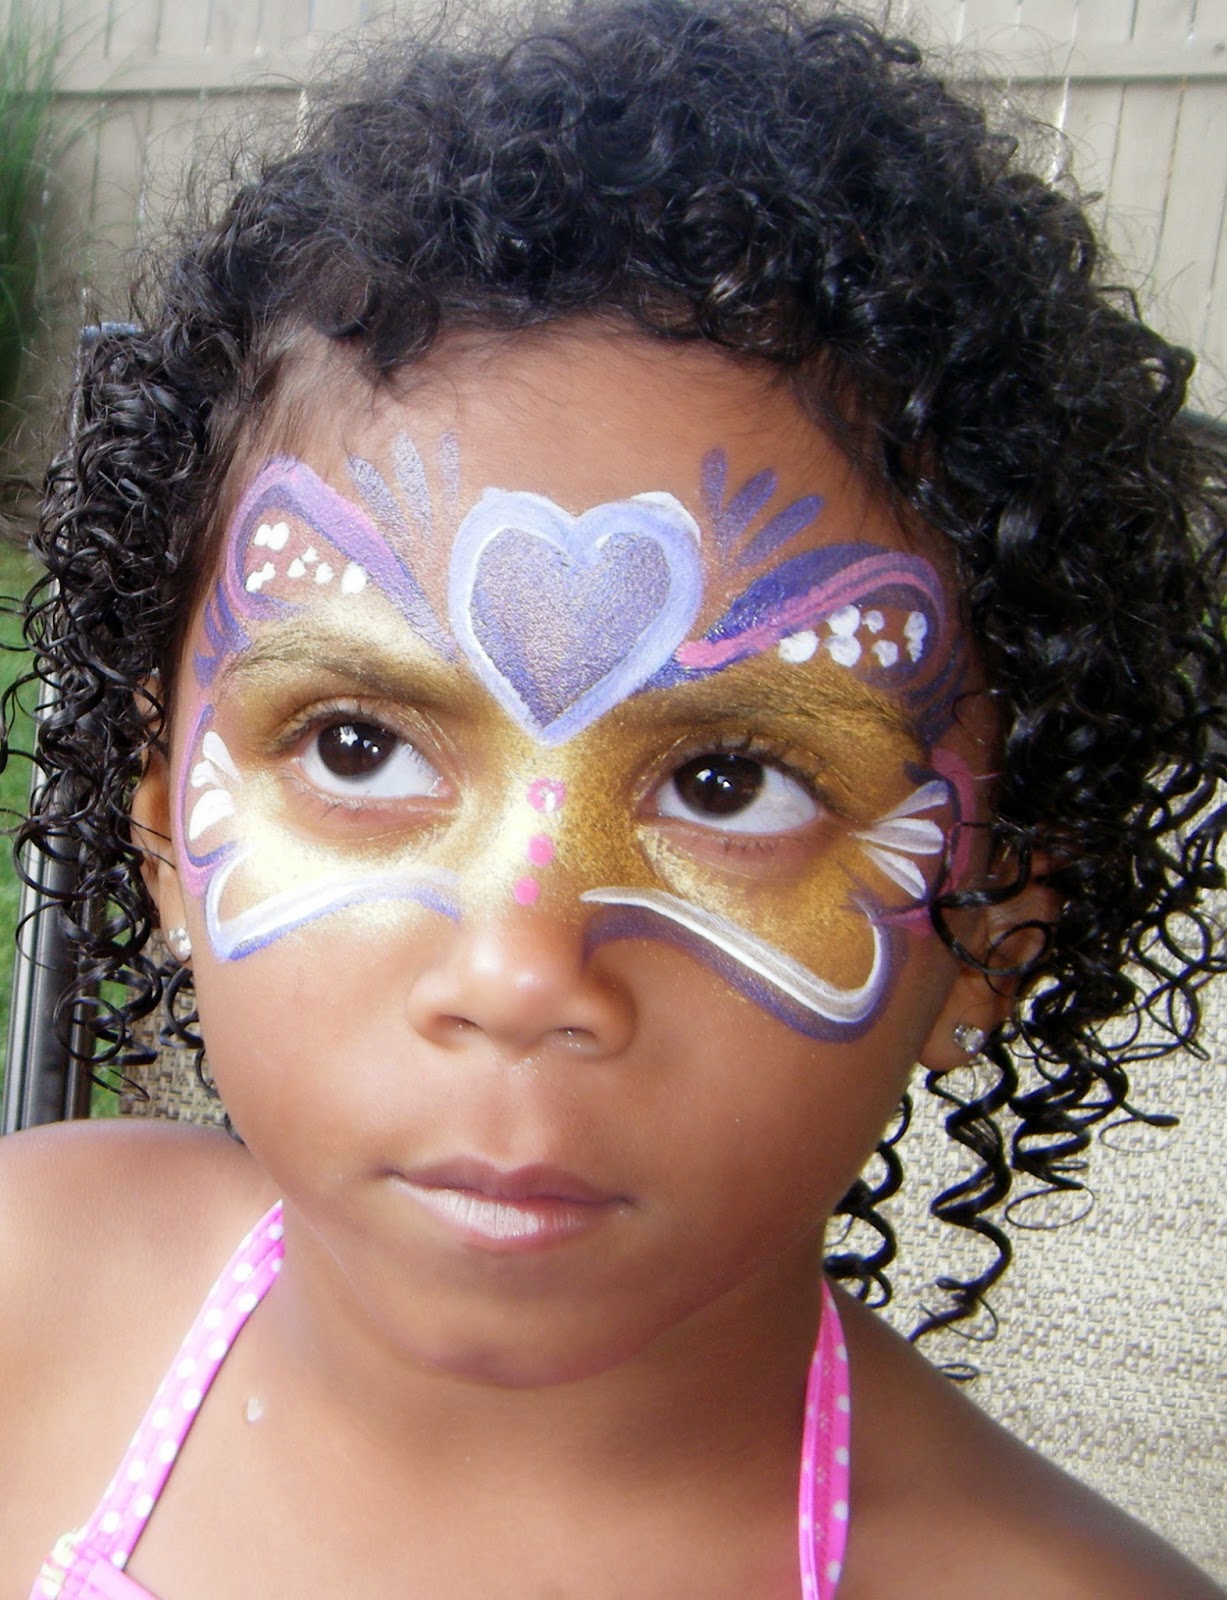 Adventures of a Face Painter: Not a Typical Start to the Week